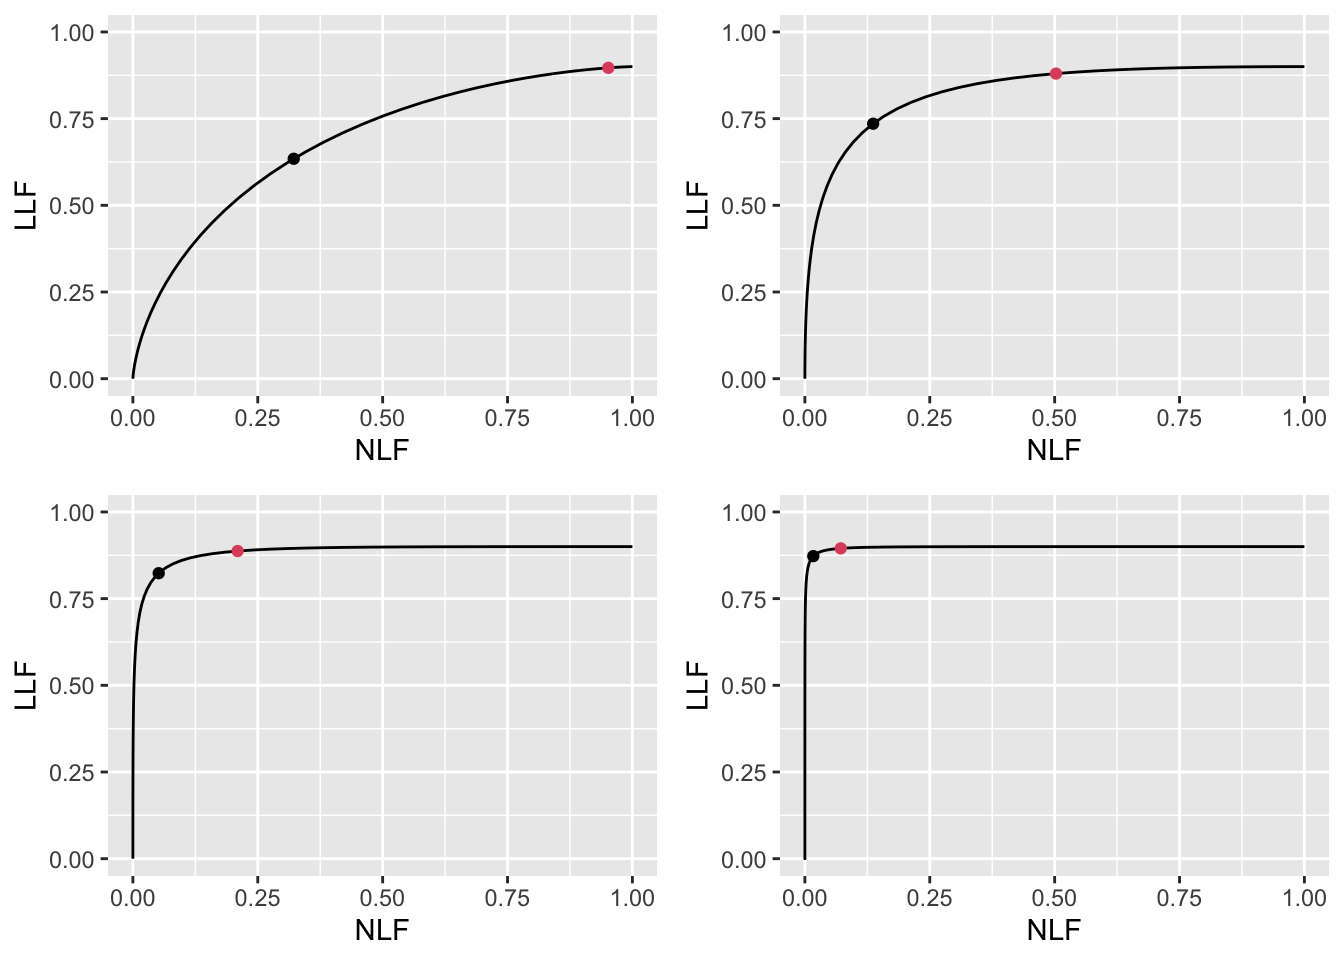 Varying $\mu$ FROC plots with superimposed operating points. The red dot corresponds to $\text{wAFROC}_\text{AUC}$ optimization and the black dot to Youden-index optimization. The values of $\mu$ are: top-left $\mu = 1$, top-right $\mu = 2$, bottom-left $\mu = 3$ and bottom-right $\mu = 4$.